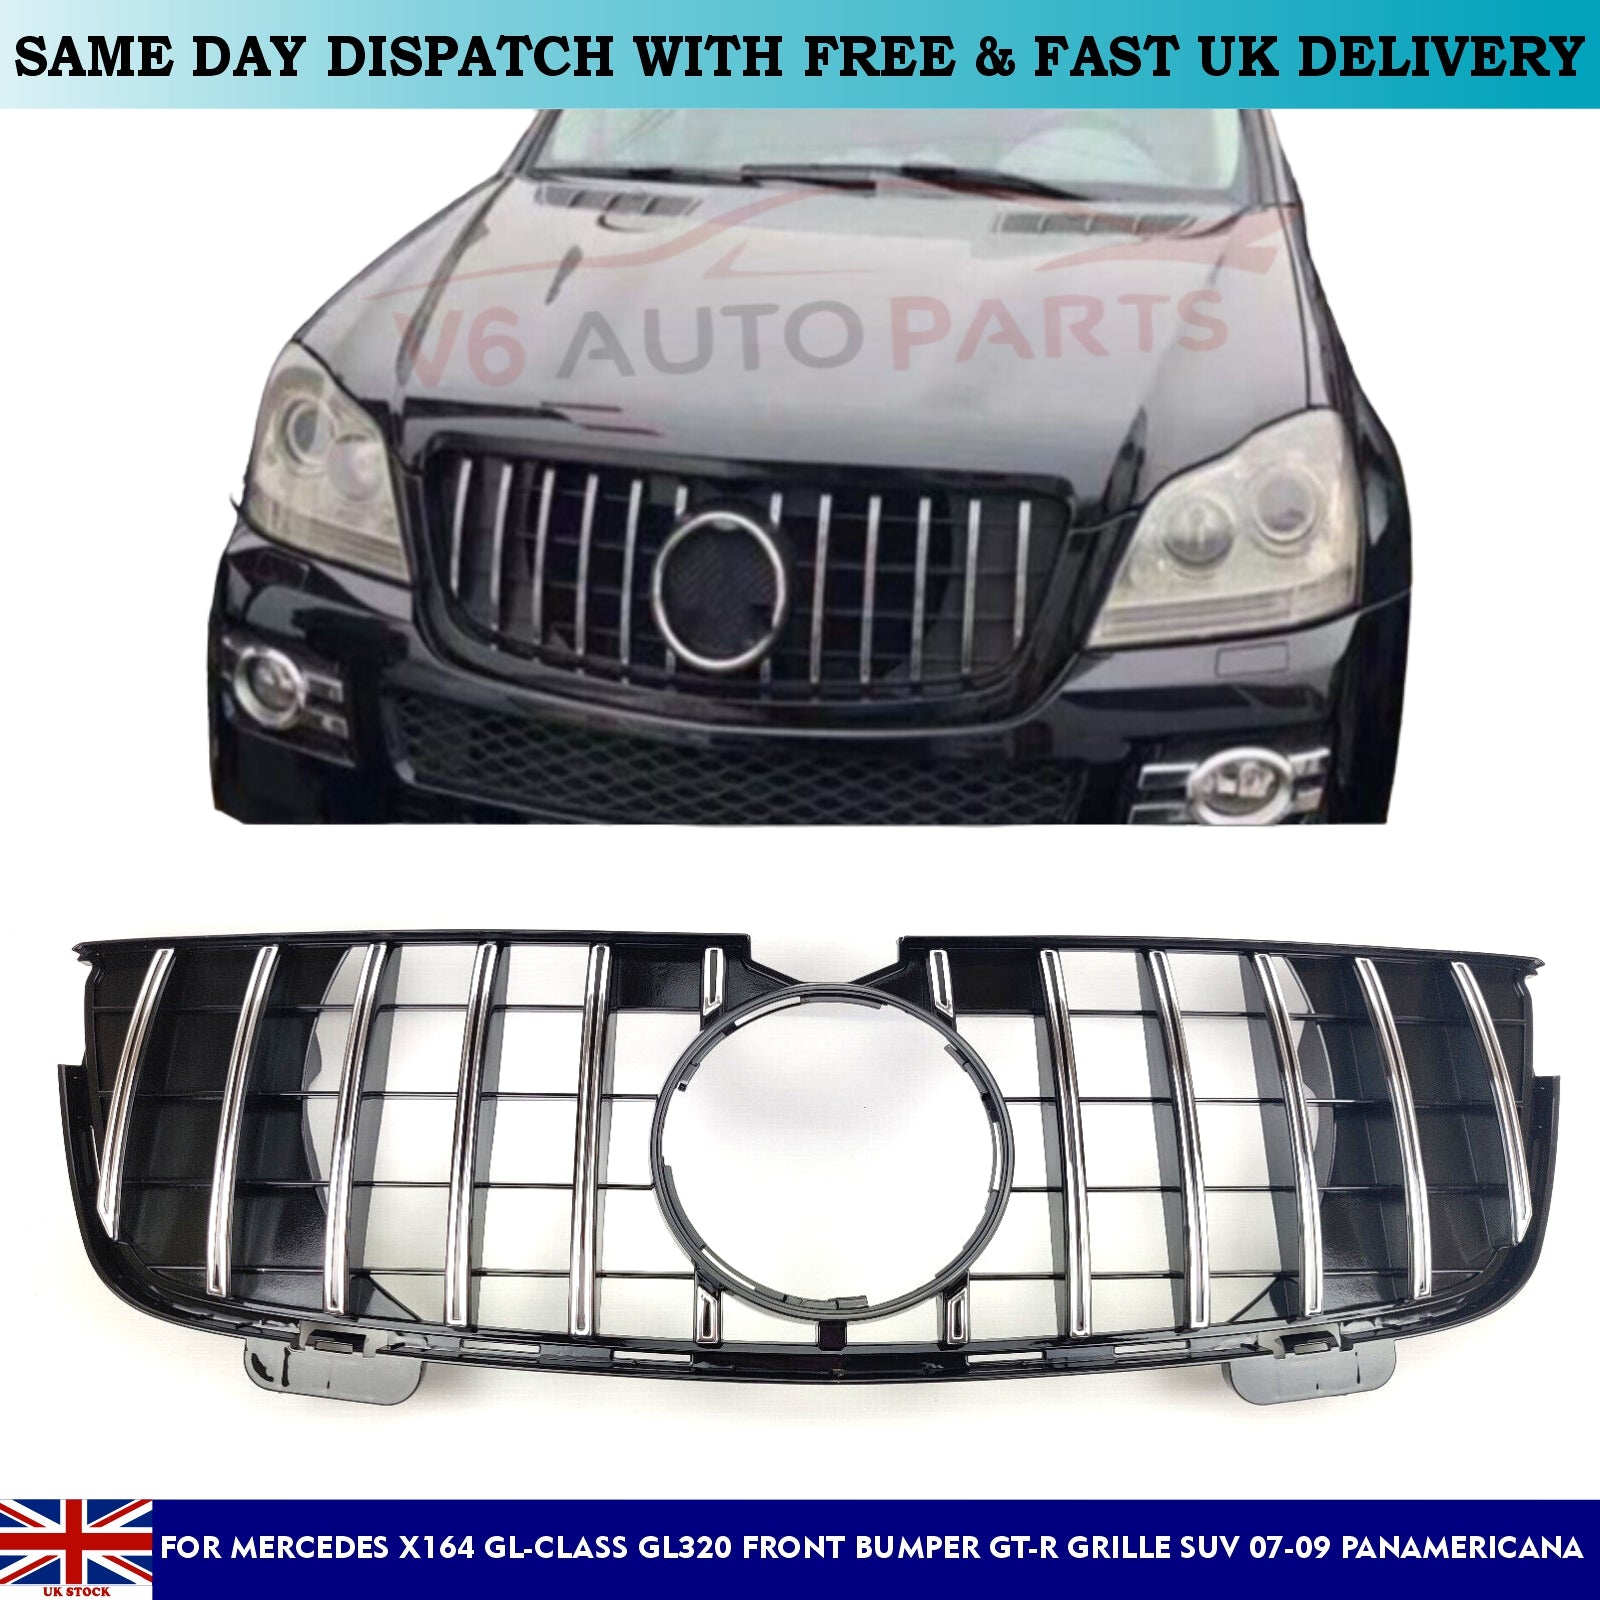 For Mercedes X164 GL-Class GL500 Front Radiator GT-R Grille 2007-09 Panamericana